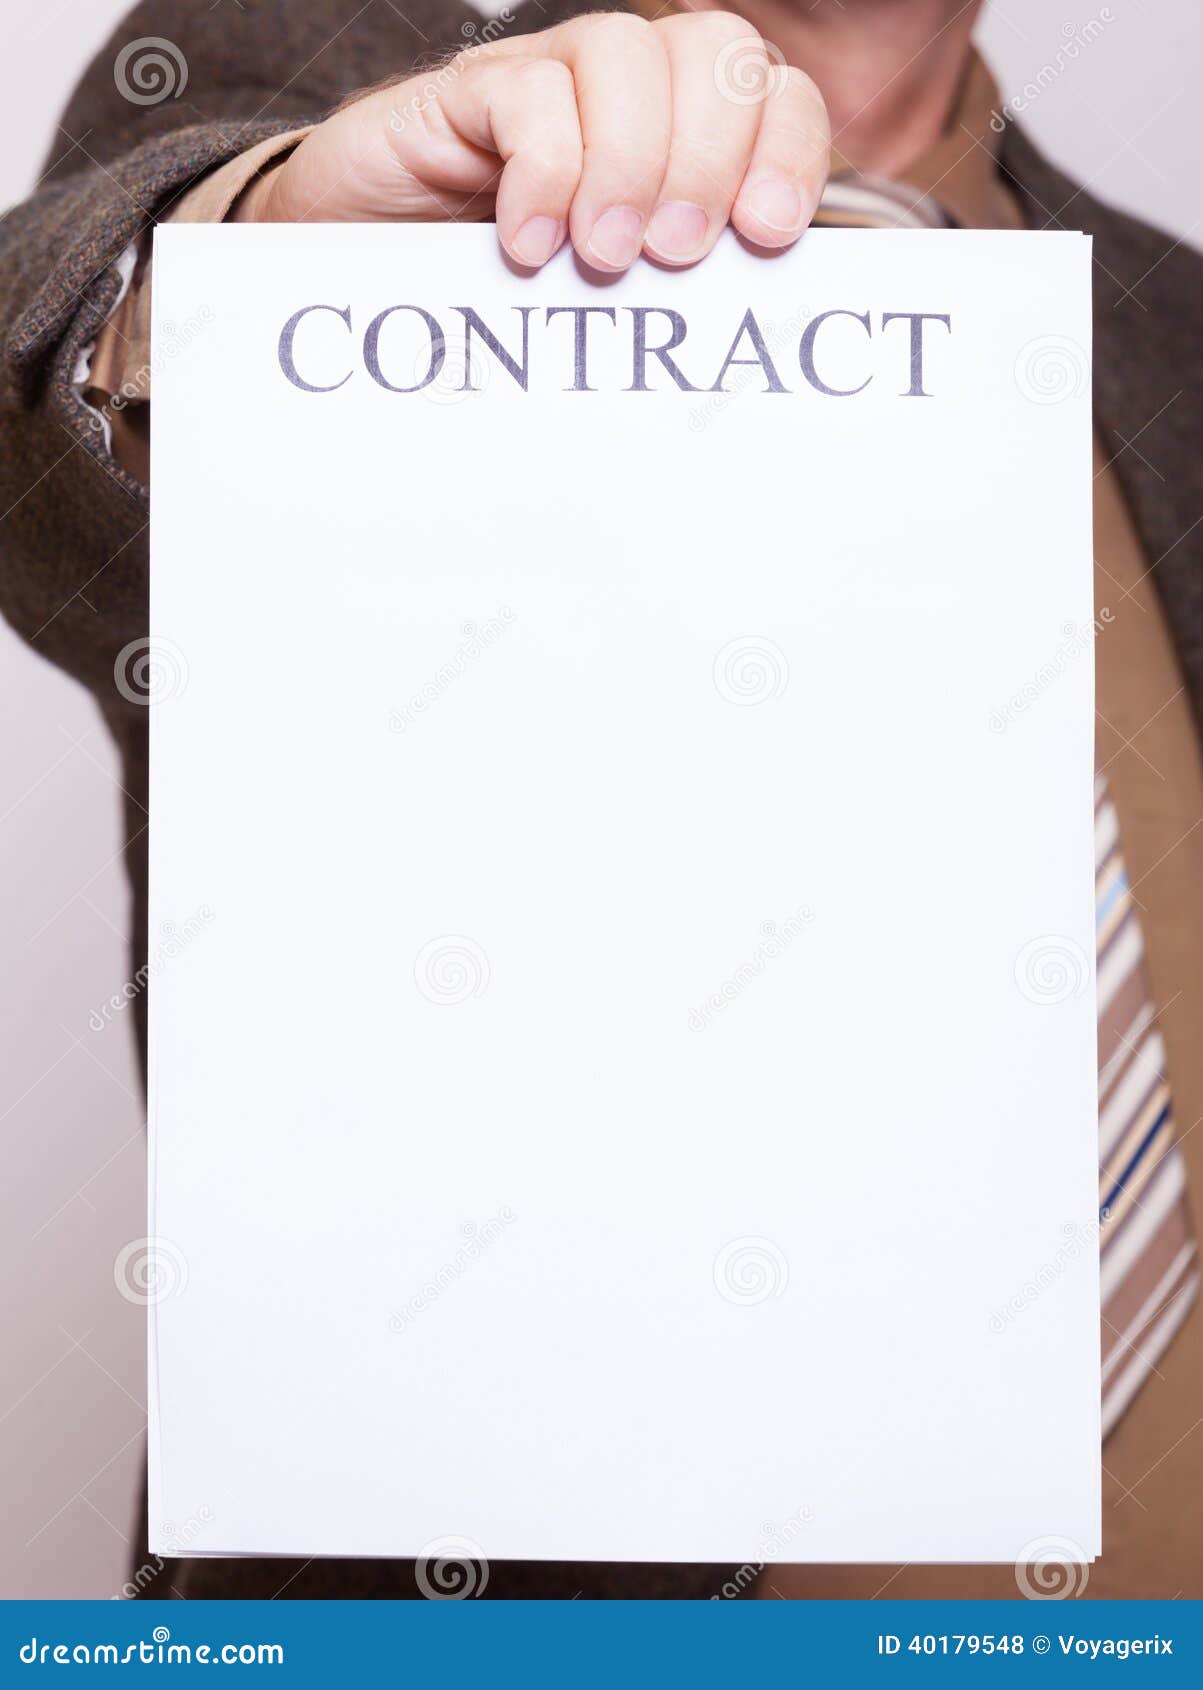 Contact Paper